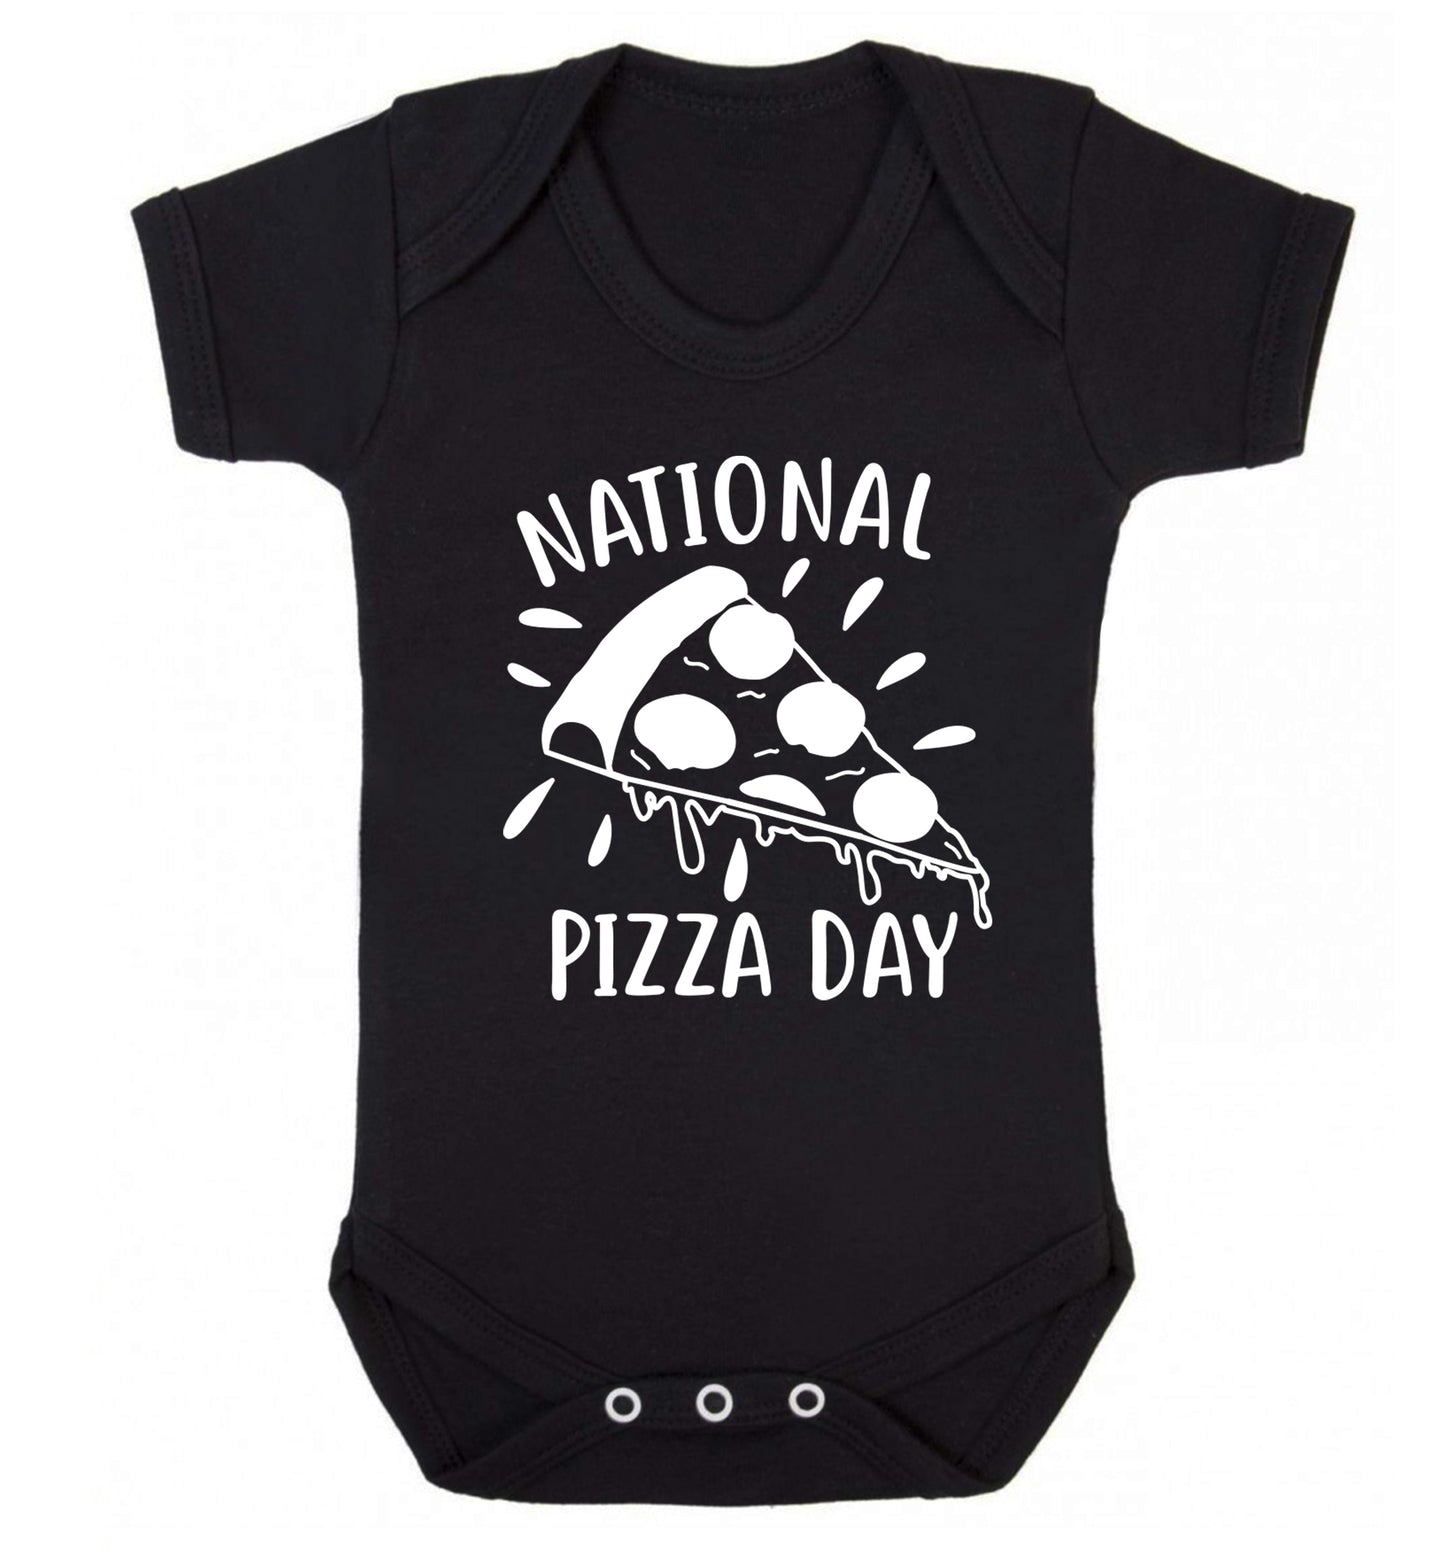 National pizza day Baby Vest black 18-24 months